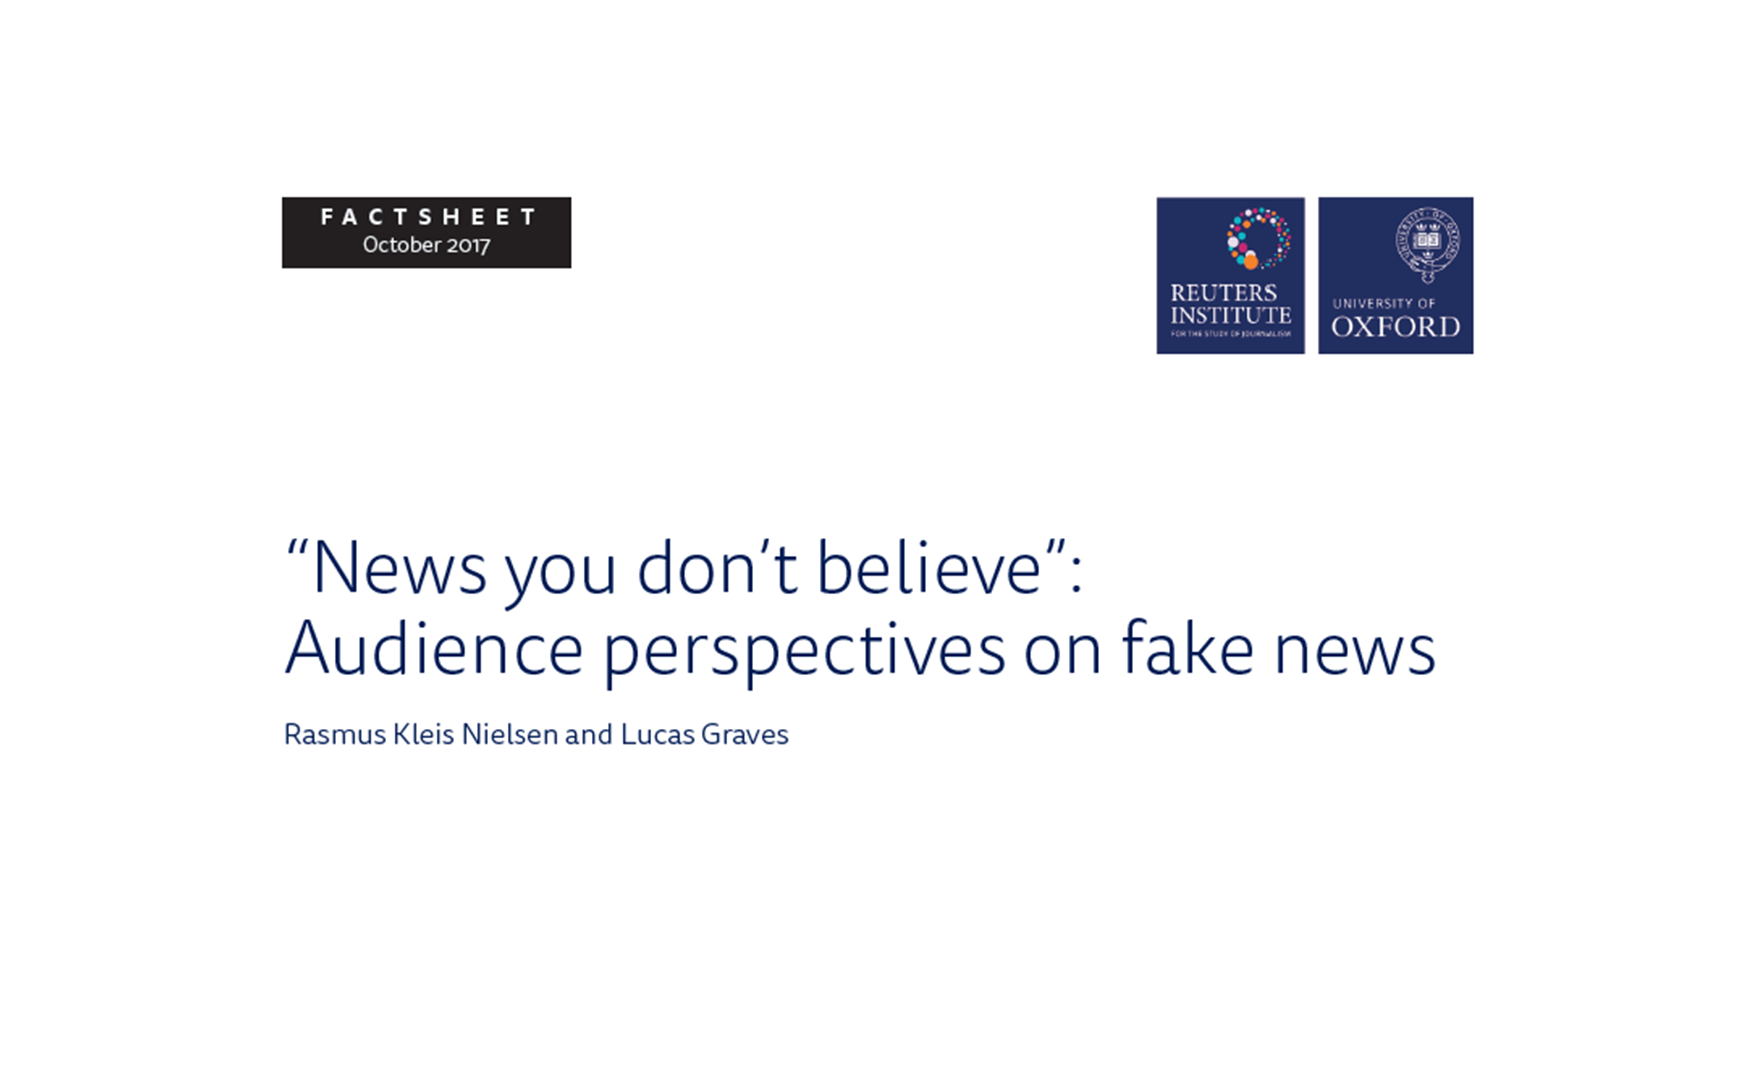 News you don't believe”: Audience perspectives on fake news | Reuters Institute for the Study Journalism